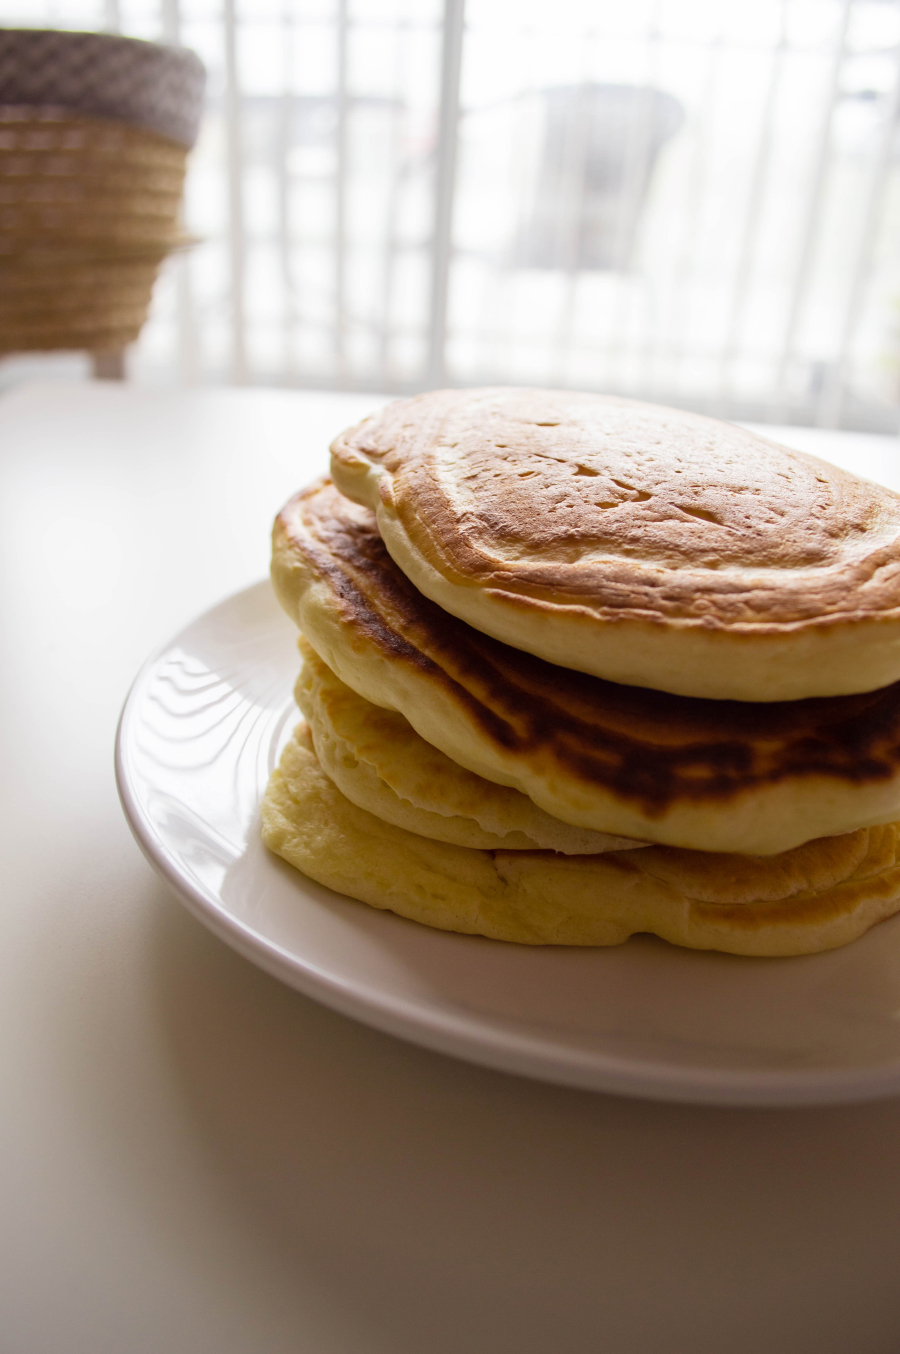 Pancake perfection for this year's Mother's Day festivities - treat mom to fluffy, buttery flapjacks!